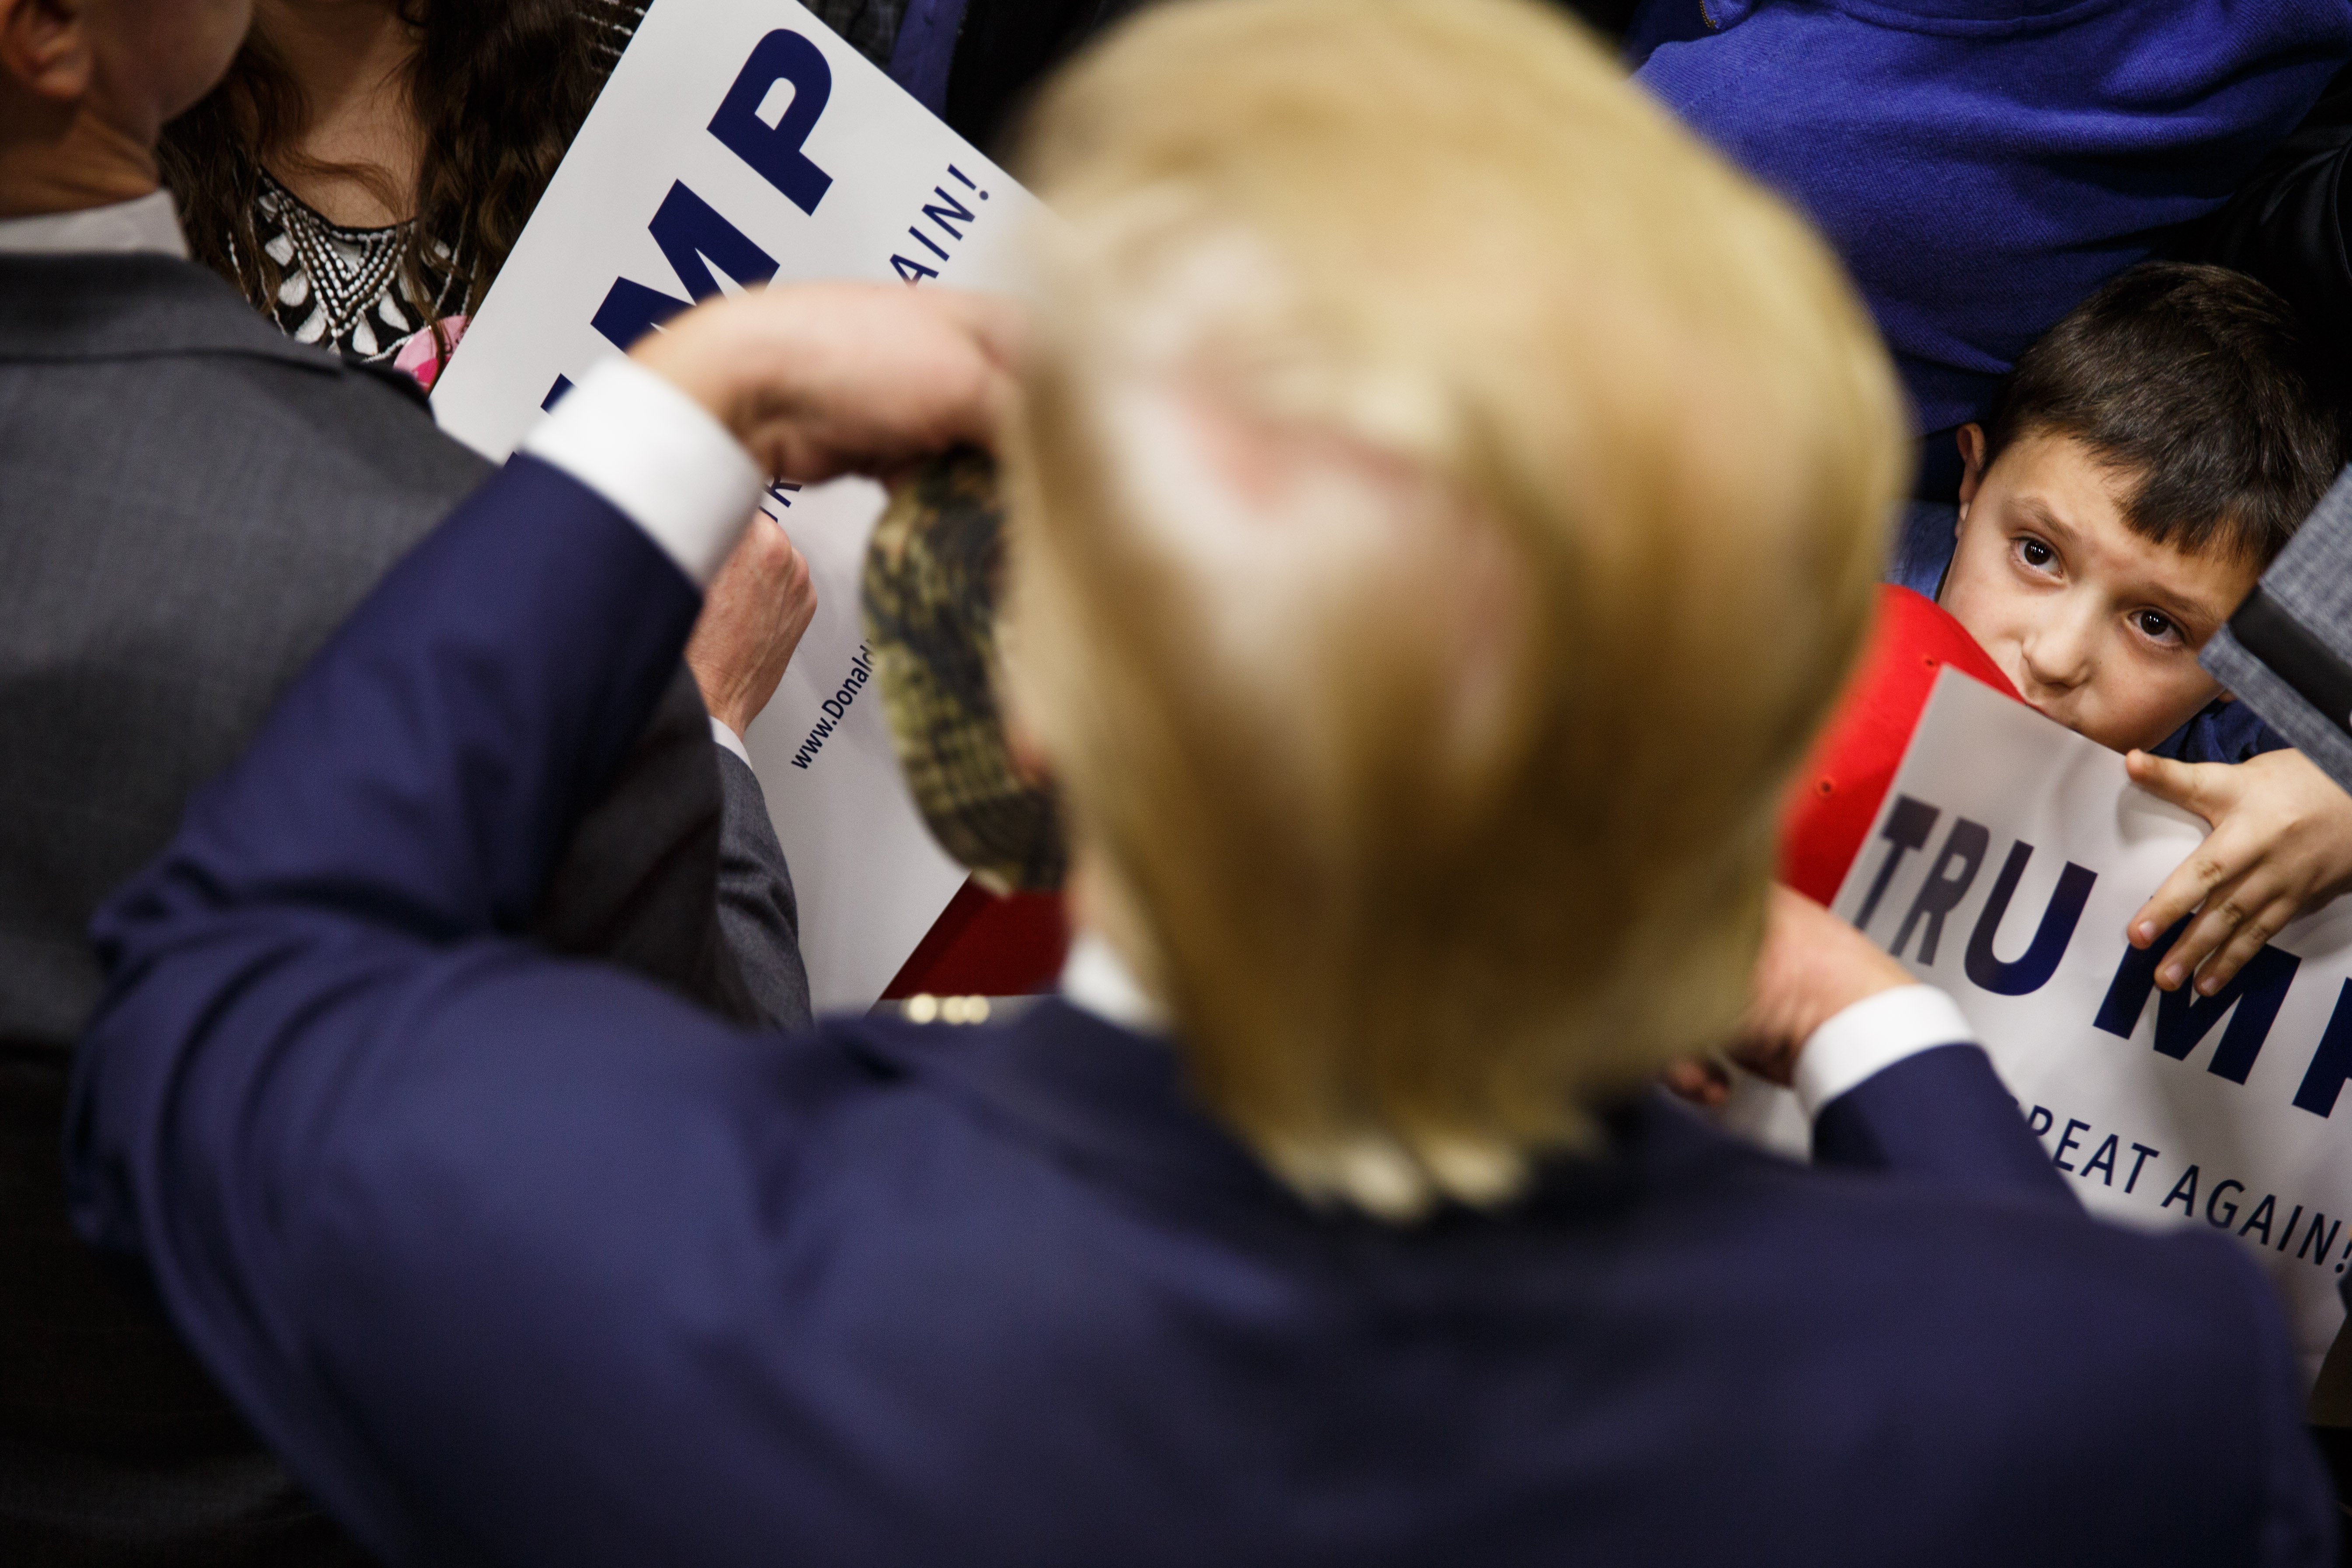 Republican presidential candidate Donald Trump greets attendees after speaking at the Great Bay Community College in Portsmouth, N.H., Feb. 4, 2016.